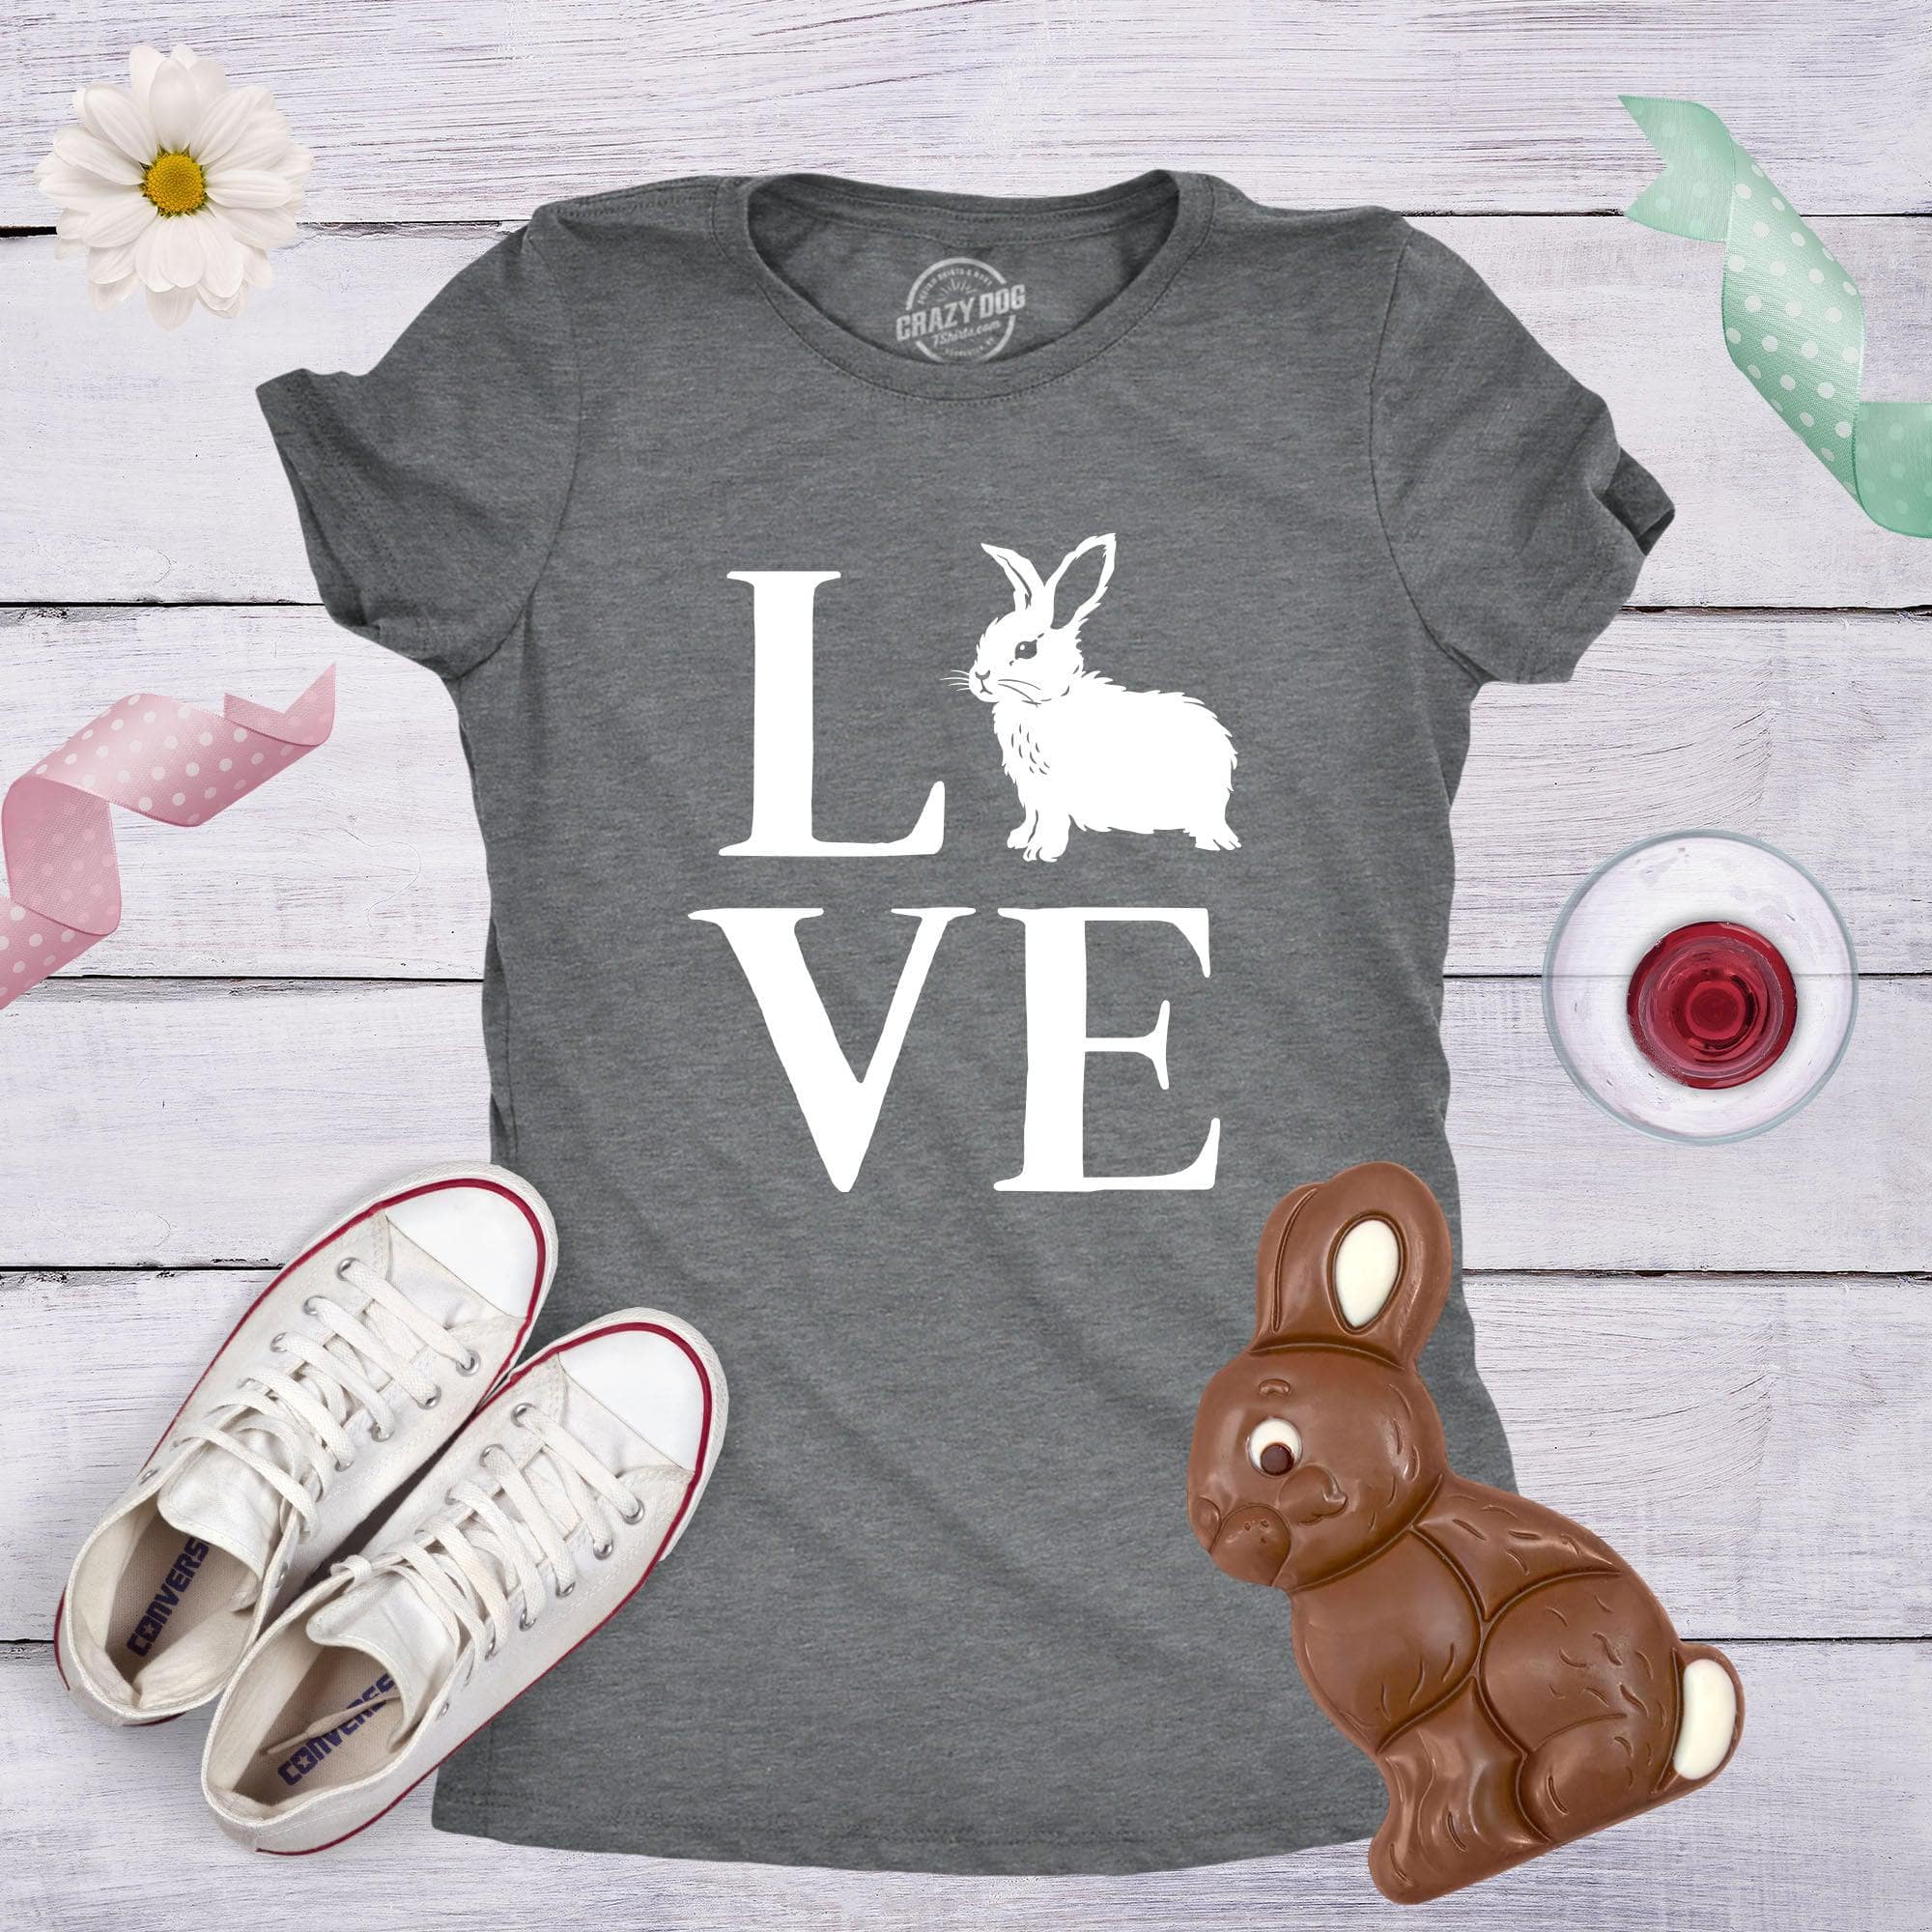 Funny Easter T-shirts, Cute Bunny Tees